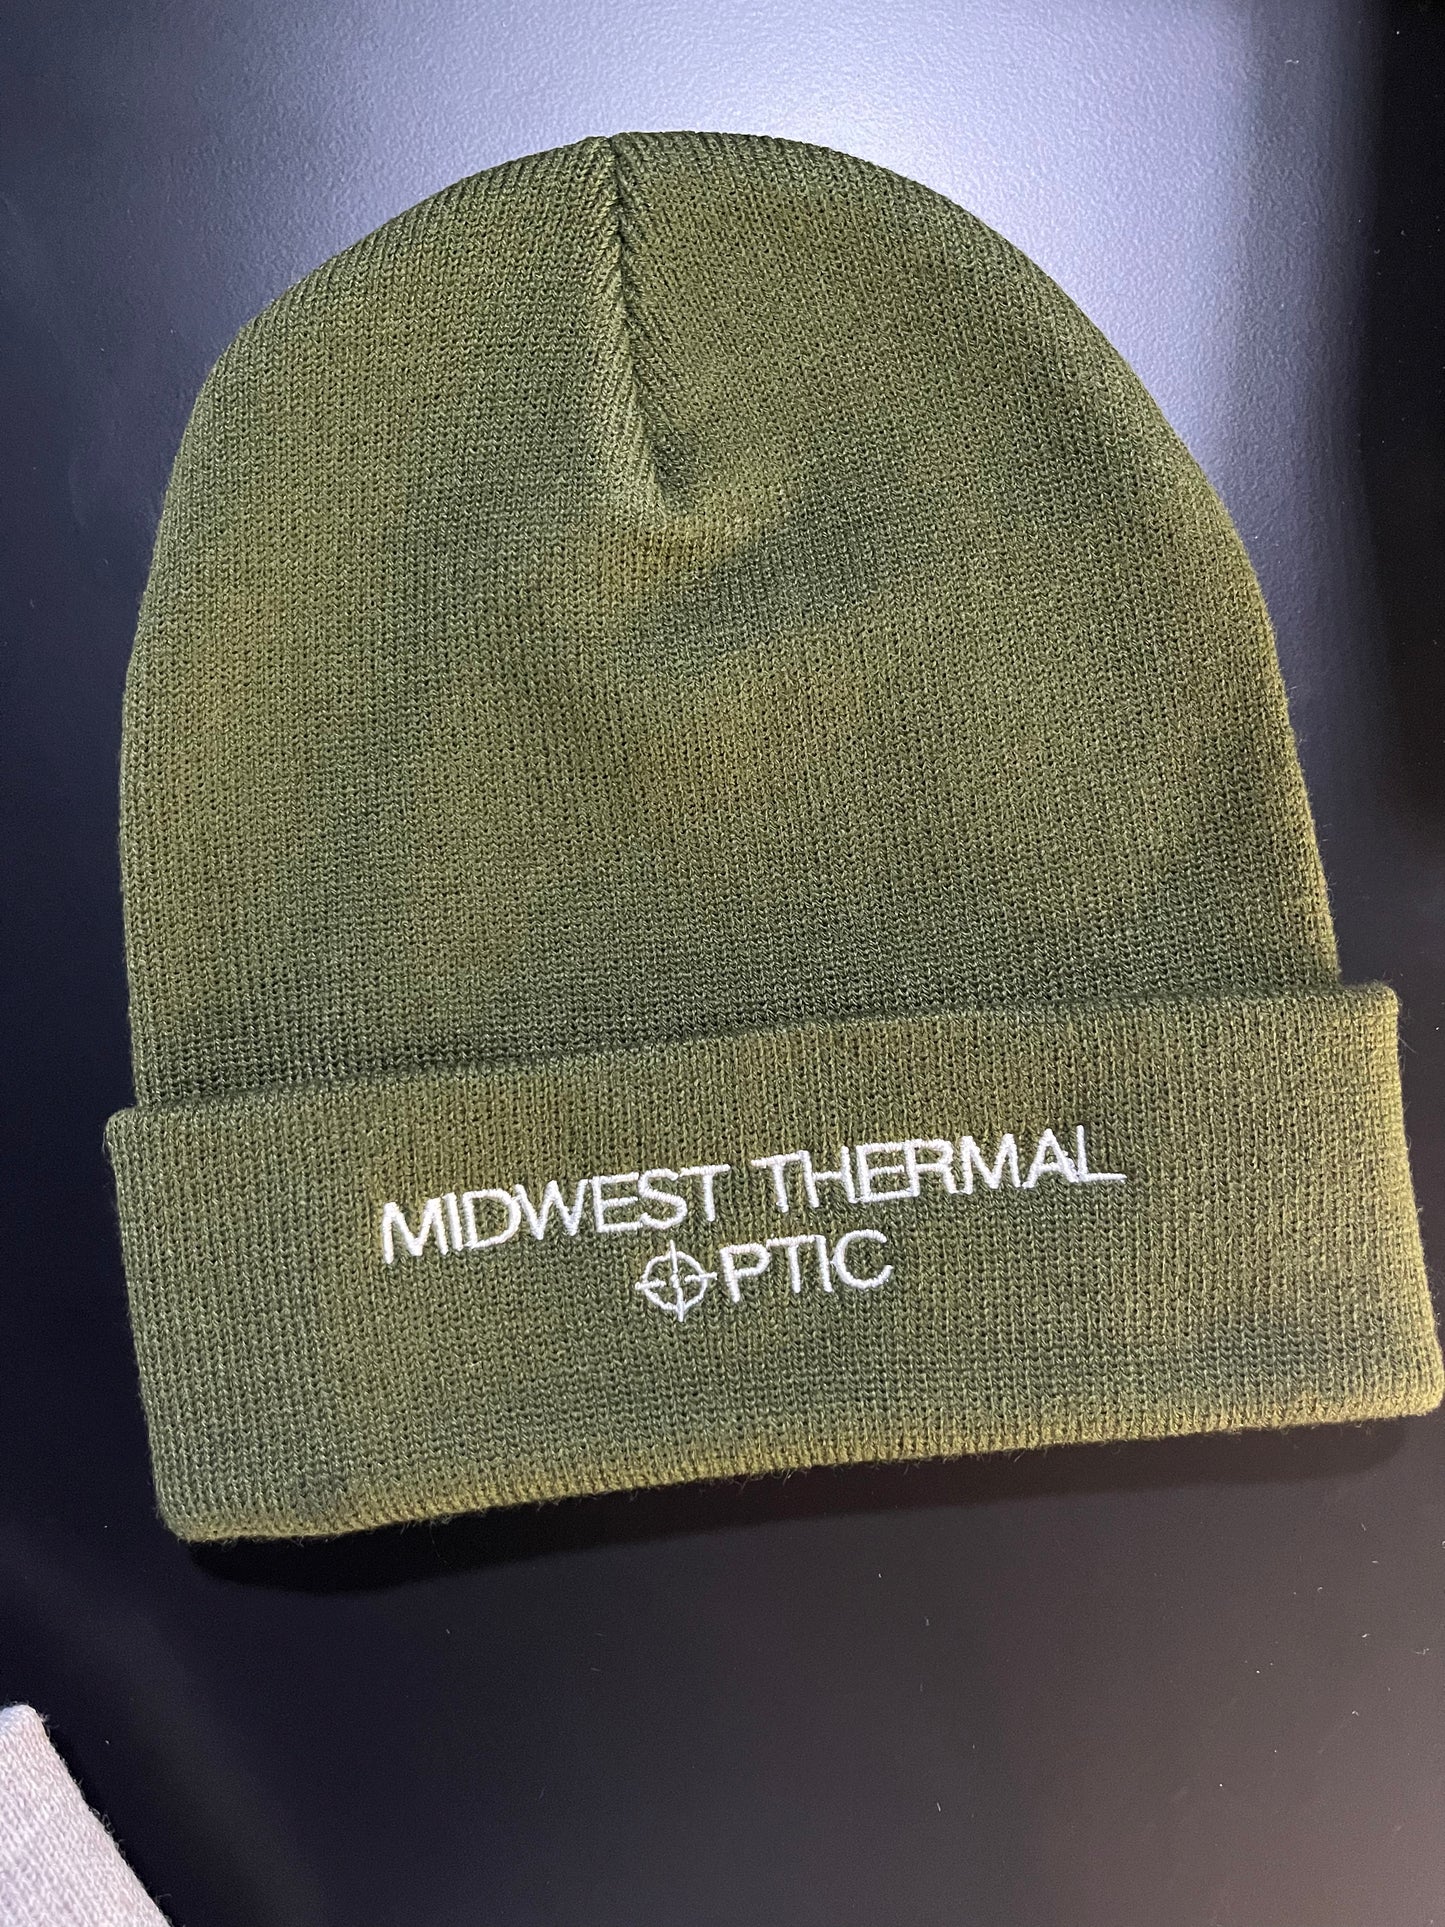 Midwest Thermal Optics Embroidered Beanie/Hat